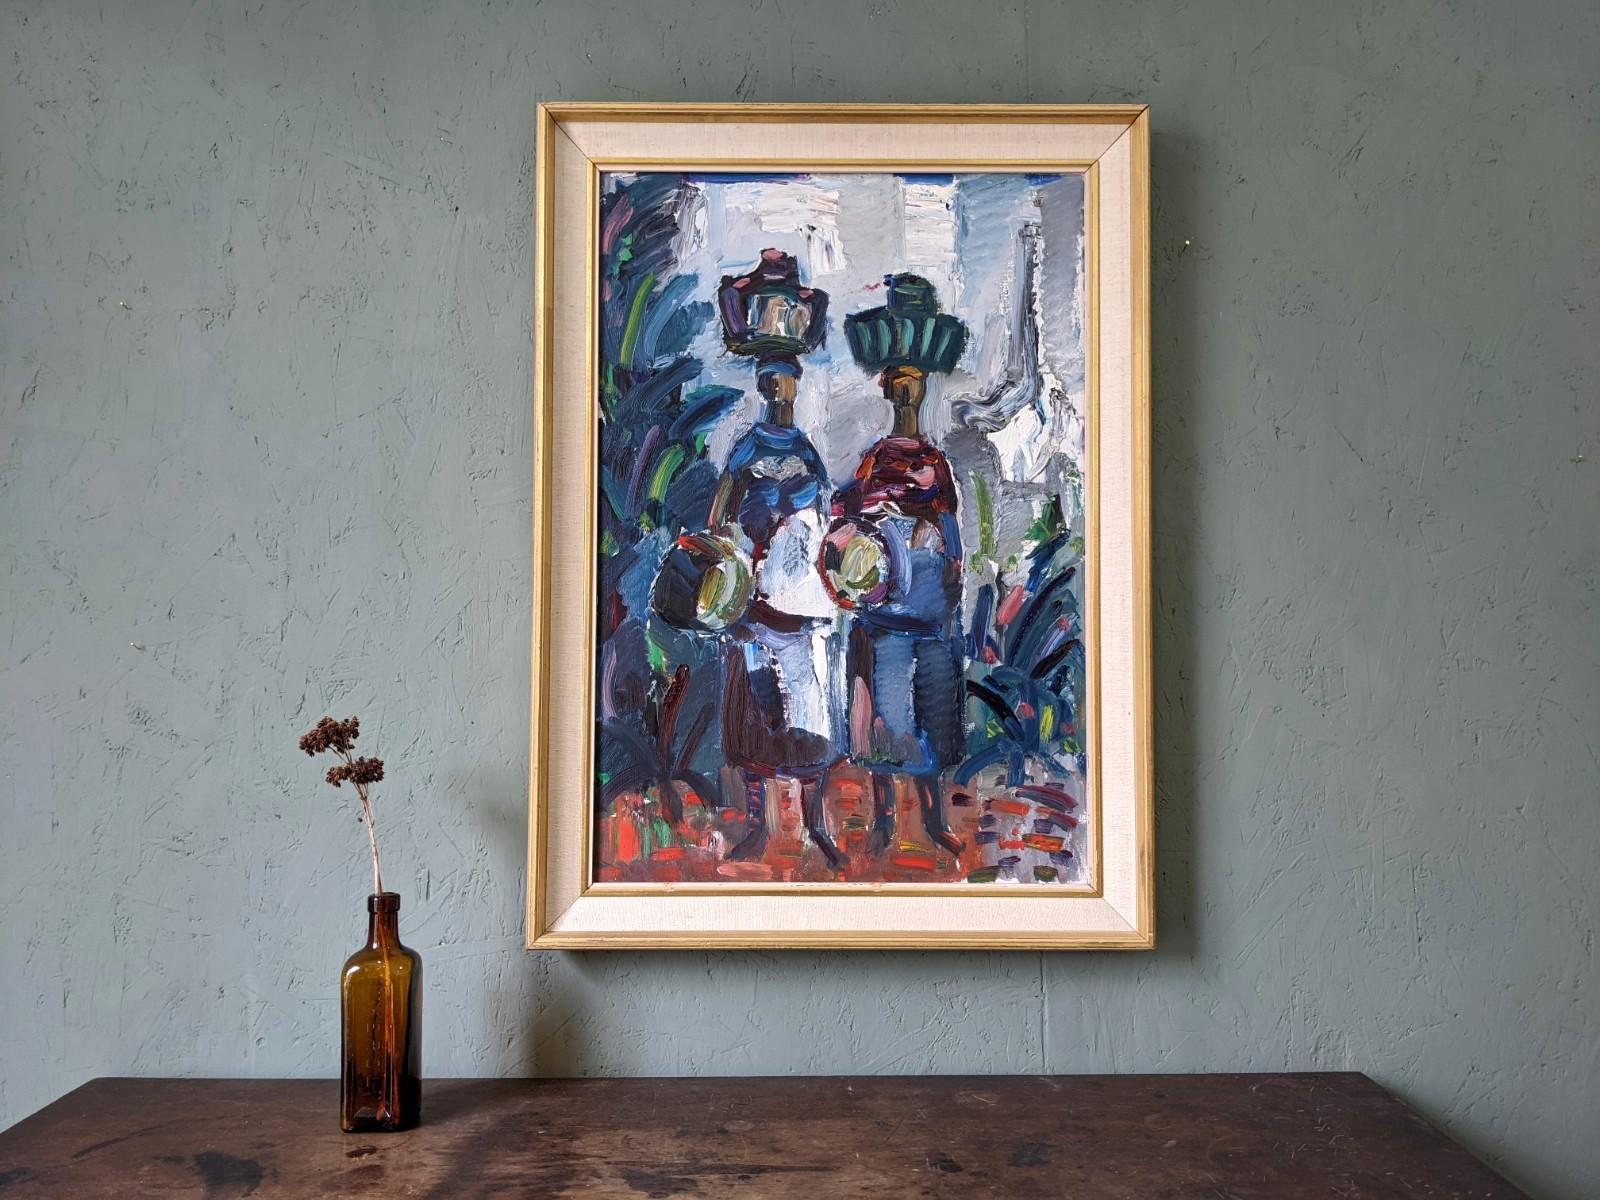 MOROCCAN LADIES
Size: 75 x 55 cm (including frame)
Oil on canvas

A lively and visually striking modernist figurative painting, executed in oil onto canvas.

This composition depicts 2 figures with baskets on their heads and in their hands,